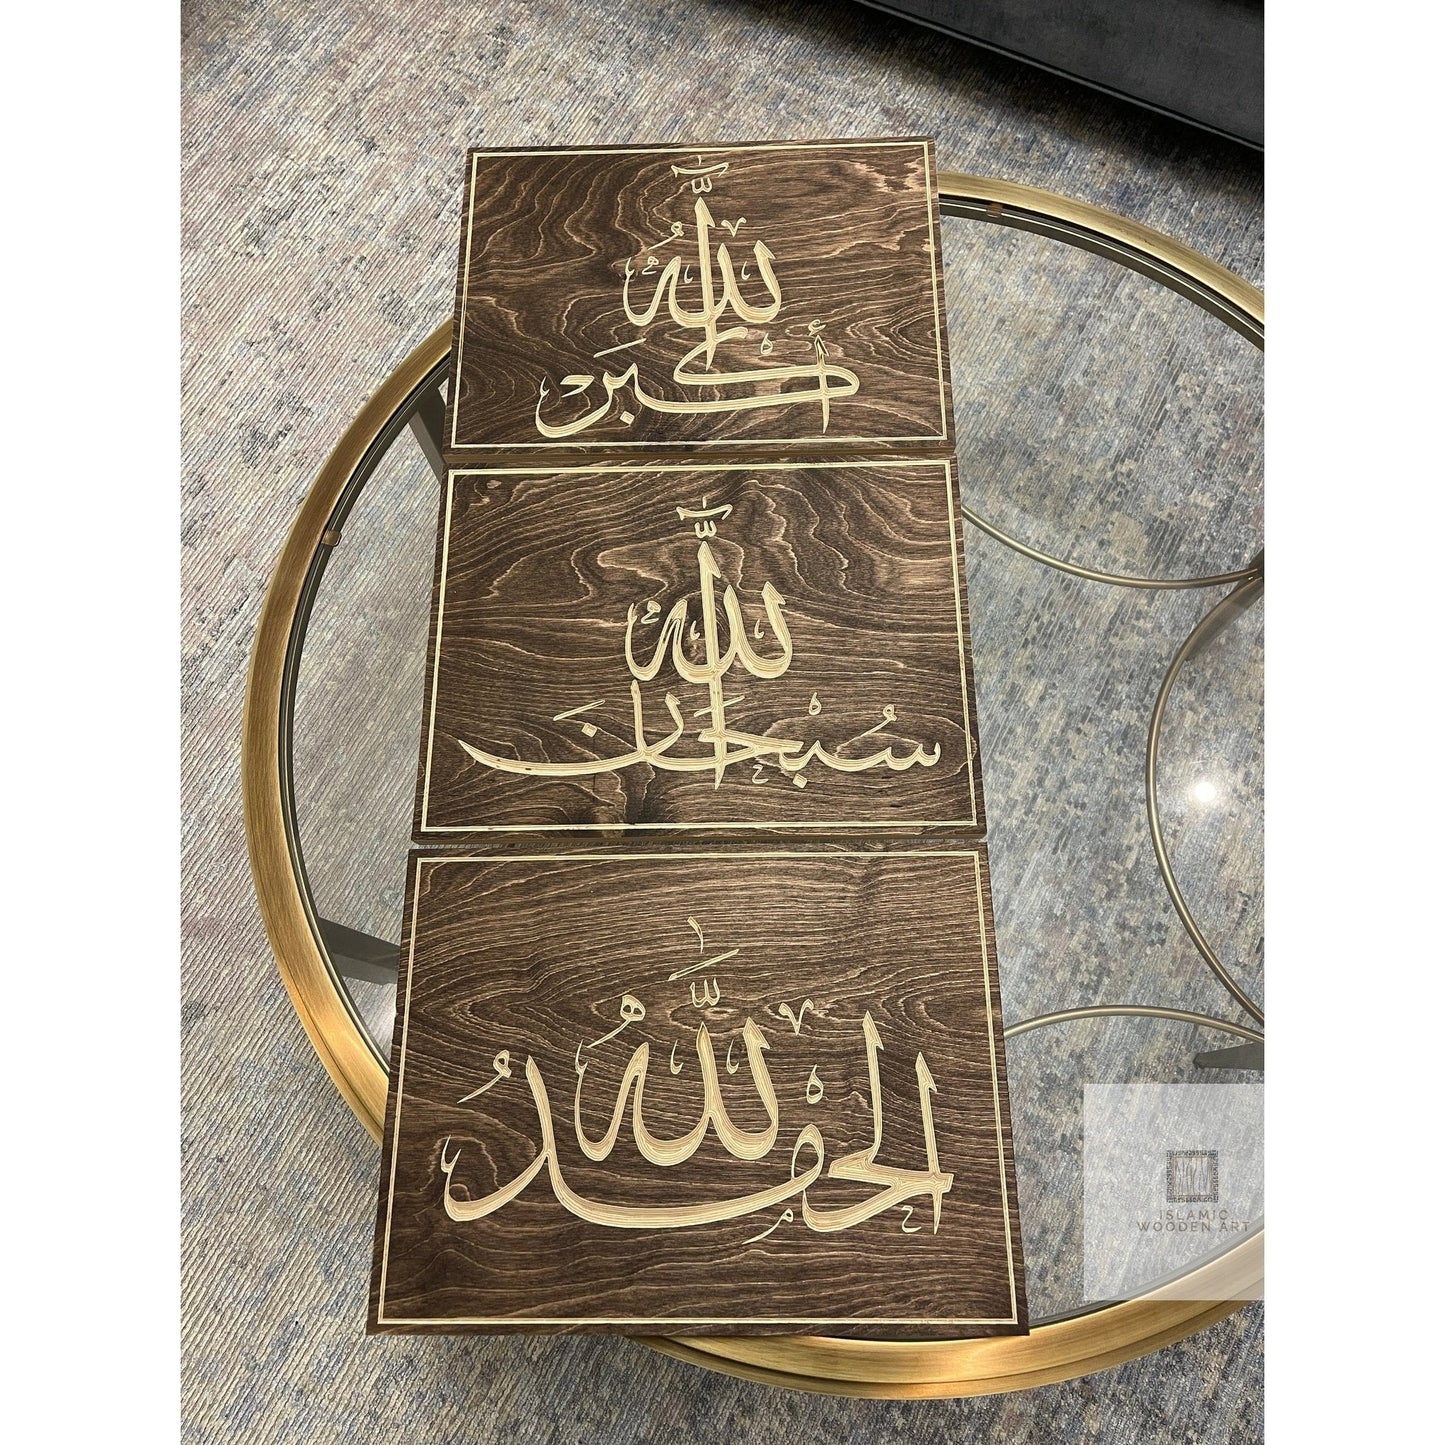 3 Piece Dhikr Set Carving